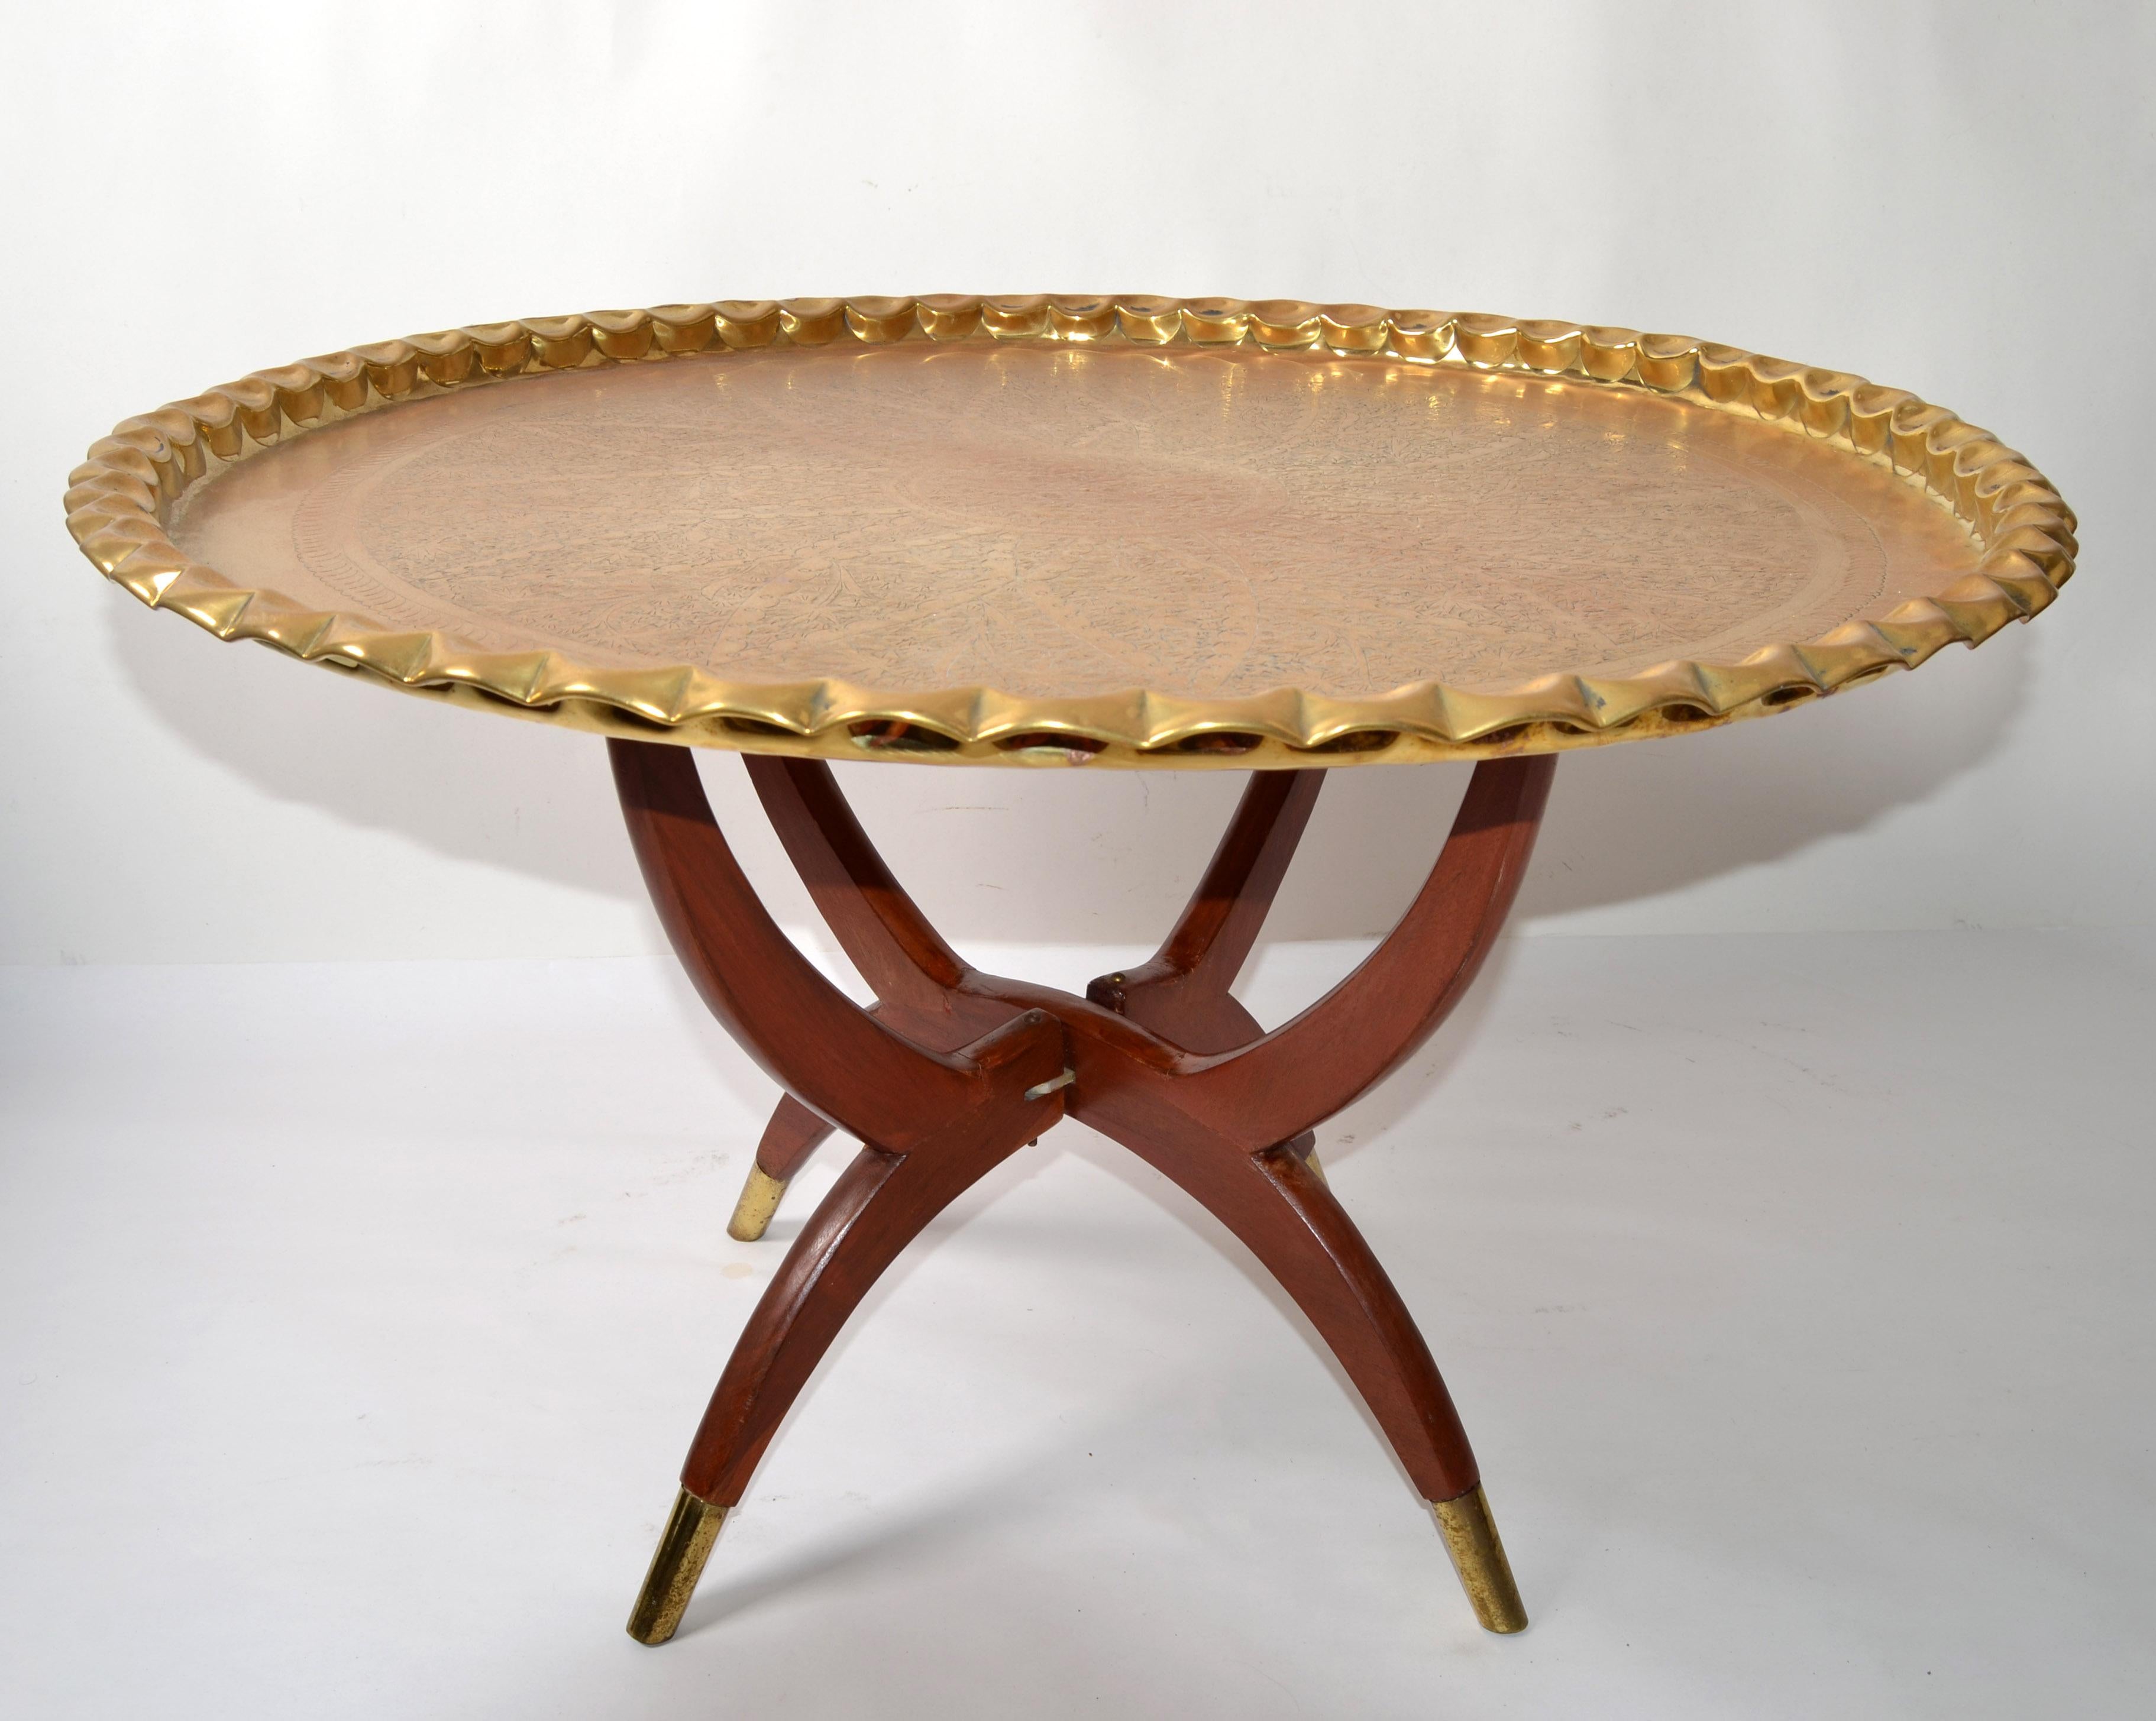 Oriental Vintage Round Walnut Spider Leg and Bronze Moroccan Tray Coffee Table For Sale 7